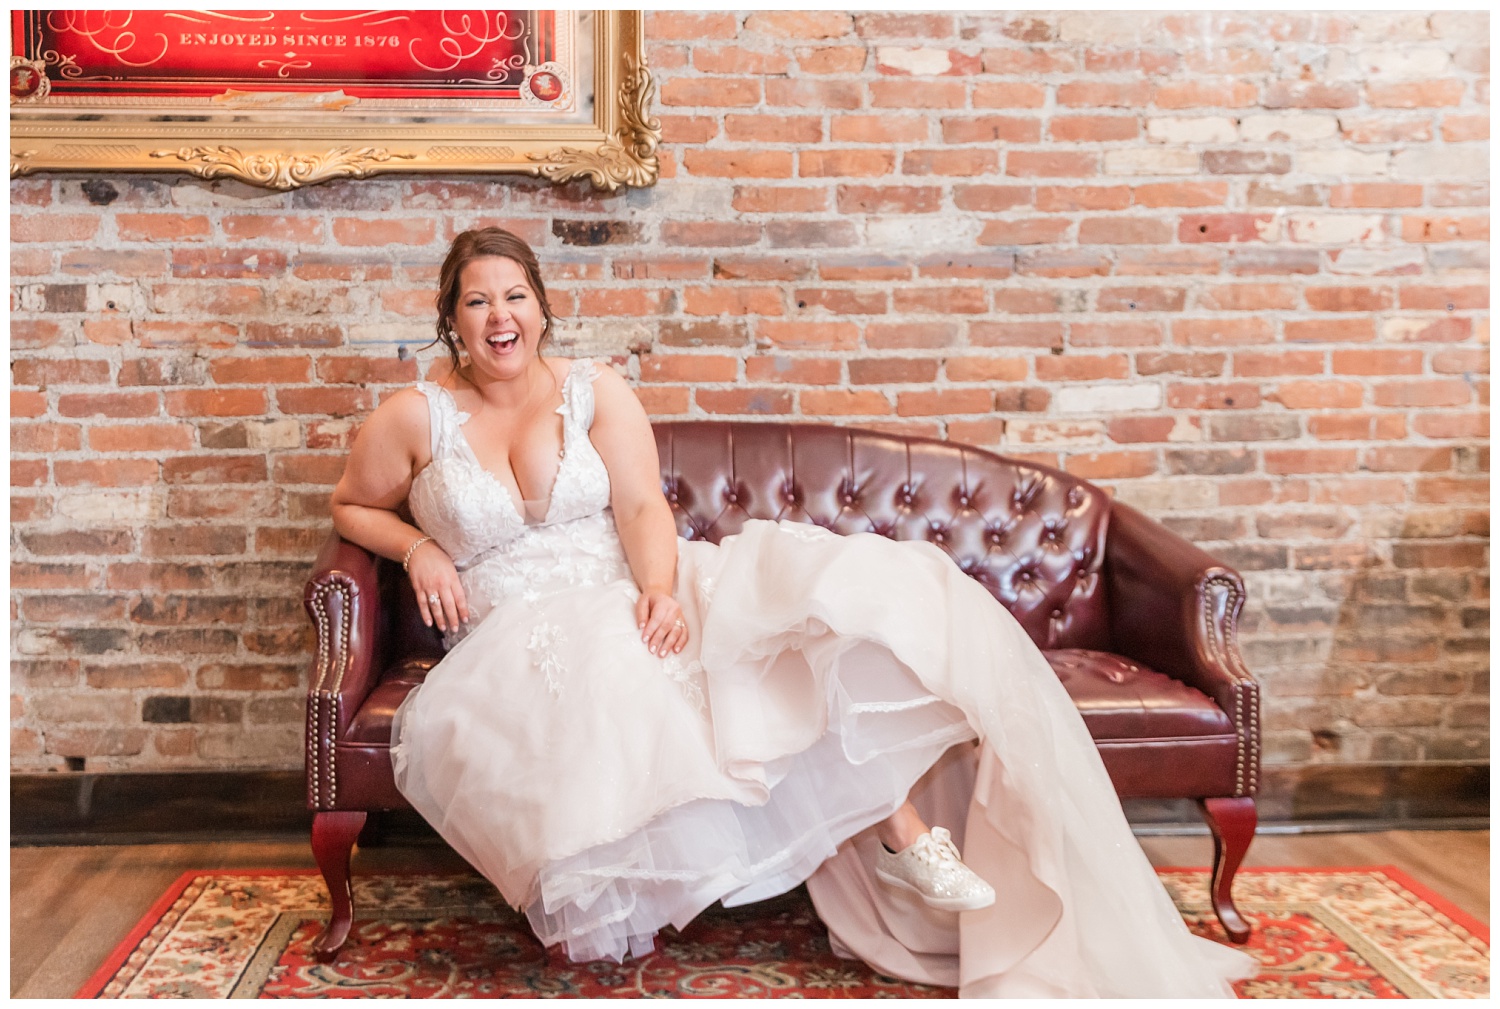 bride laughing on a leather couch at wedding reception